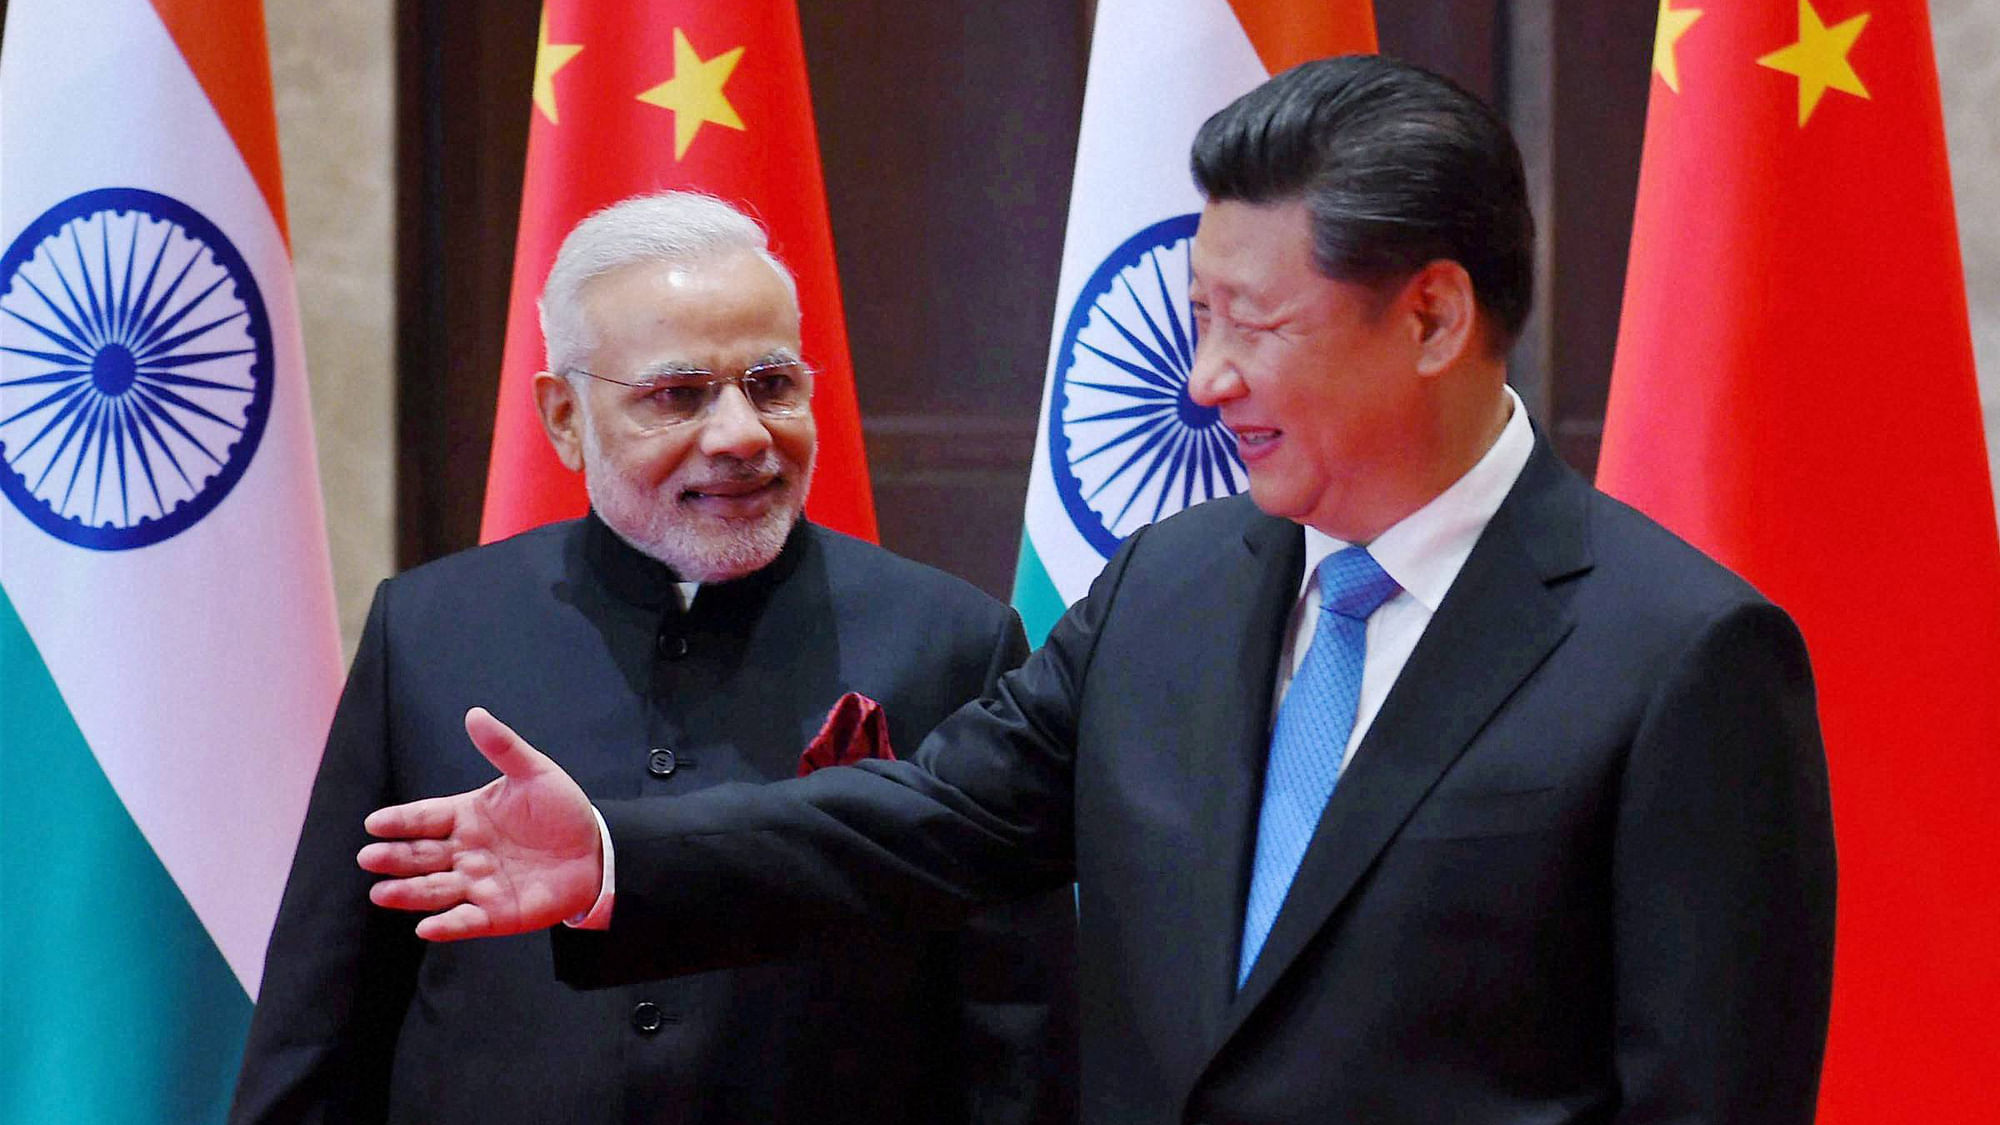 Prime Minister Narendra Modi (left) with Chinese President Xi Jinping (right) during a meeting in Xian. Archival image used for representational purposes.